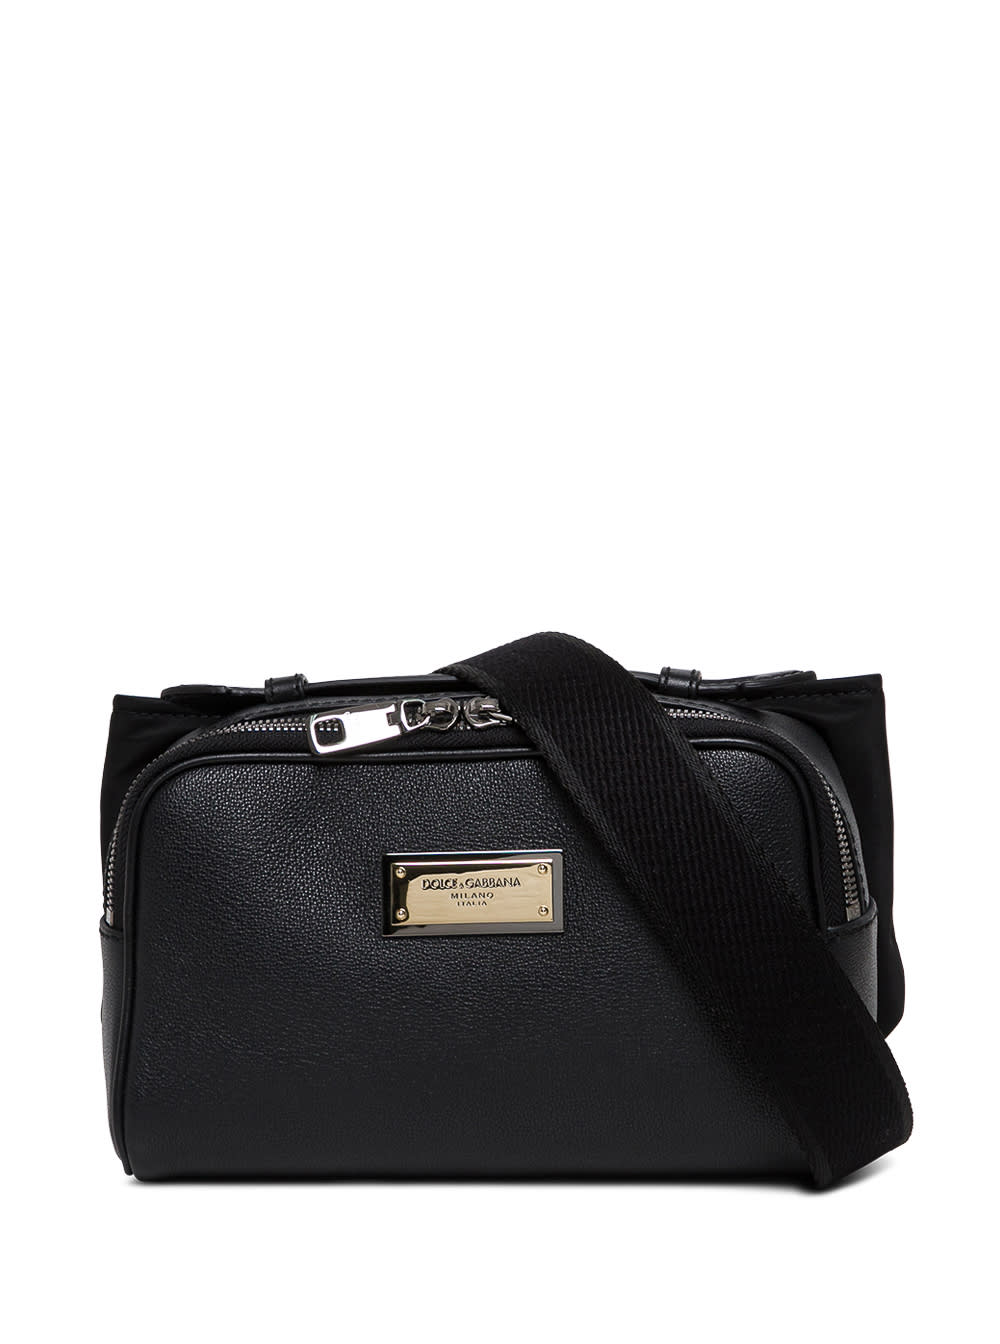 Dolce & Gabbana Black Leather And Nylon Belt Bag With Logo Plate